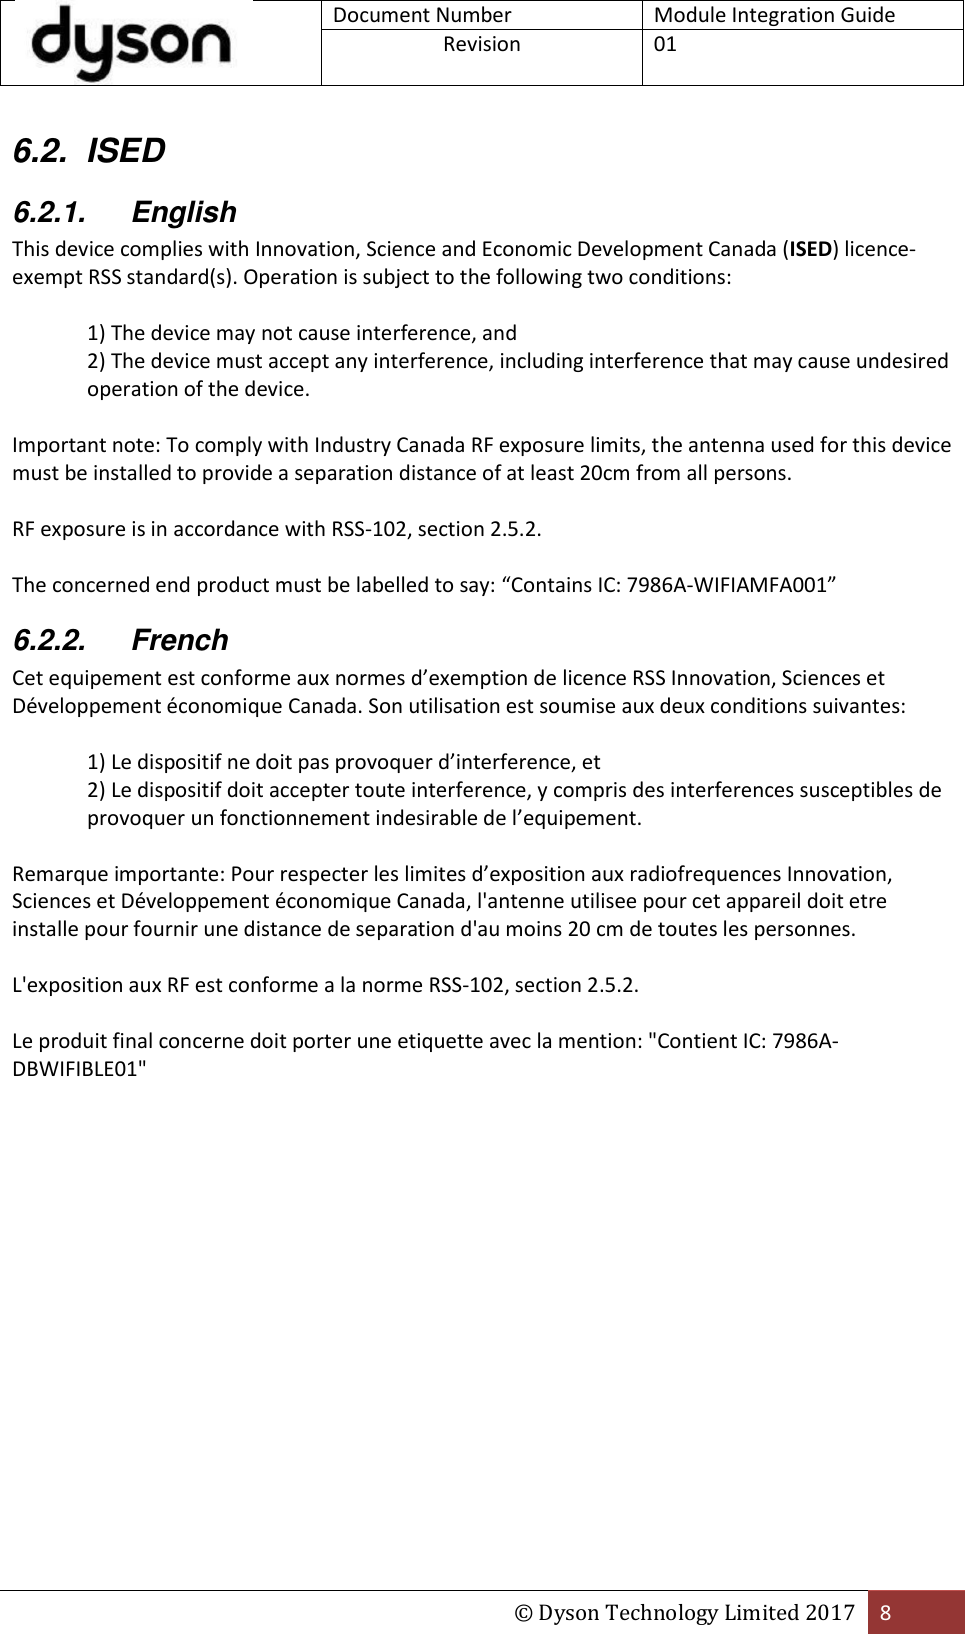  Document Number Module Integration Guide Revision  01  © Dyson Technology Limited 2017 8  6.2.  ISED 6.2.1.  English This device complies with Innovation, Science and Economic Development Canada (ISED) licence-exempt RSS standard(s). Operation is subject to the following two conditions:  1) The device may not cause interference, and 2) The device must accept any interference, including interference that may cause undesired operation of the device.  Important note: To comply with Industry Canada RF exposure limits, the antenna used for this device must be installed to provide a separation distance of at least 20cm from all persons.  RF exposure is in accordance with RSS-102, section 2.5.2.  The concerned end product must be labelled to say: “Contains IC: 7986A-WIFIAMFA001” 6.2.2.  French Cet equipement est conforme aux normes d’exemption de licence RSS Innovation, Sciences et Développement économique Canada. Son utilisation est soumise aux deux conditions suivantes:  1) Le dispositif ne doit pas provoquer d’interference, et 2) Le dispositif doit accepter toute interference, y compris des interferences susceptibles de provoquer un fonctionnement indesirable de l’equipement.  Remarque importante: Pour respecter les limites d’exposition aux radiofrequences Innovation, Sciences et Développement économique Canada, l&apos;antenne utilisee pour cet appareil doit etre installe pour fournir une distance de separation d&apos;au moins 20 cm de toutes les personnes.  L&apos;exposition aux RF est conforme a la norme RSS-102, section 2.5.2.  Le produit final concerne doit porter une etiquette avec la mention: &quot;Contient IC: 7986A-DBWIFIBLE01&quot;    